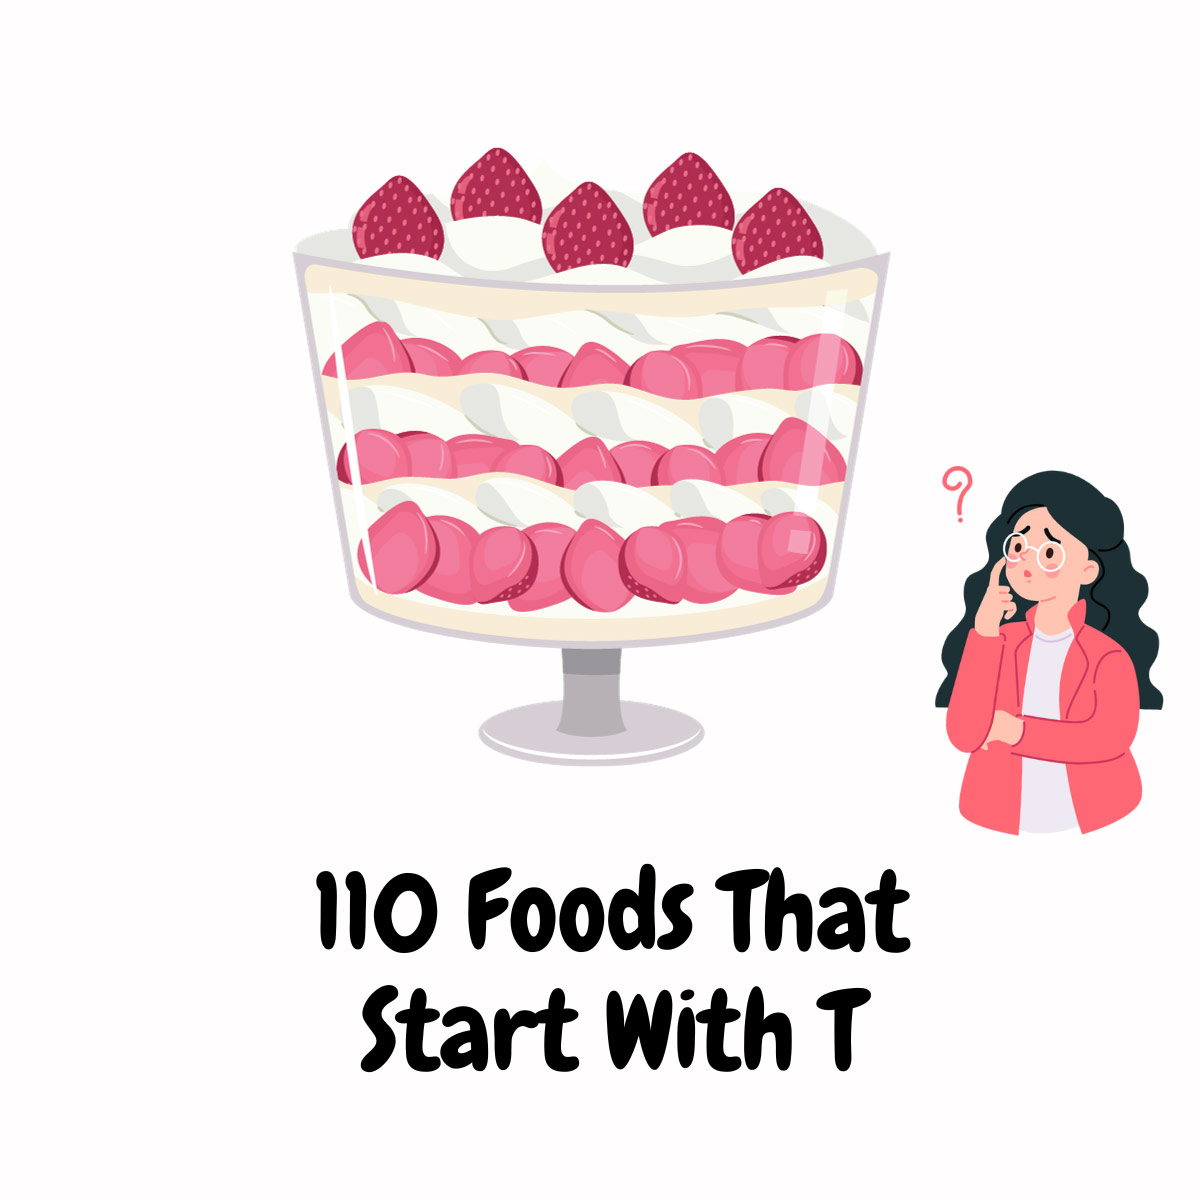 Foods That Start With T featured image | Girl Meets Food